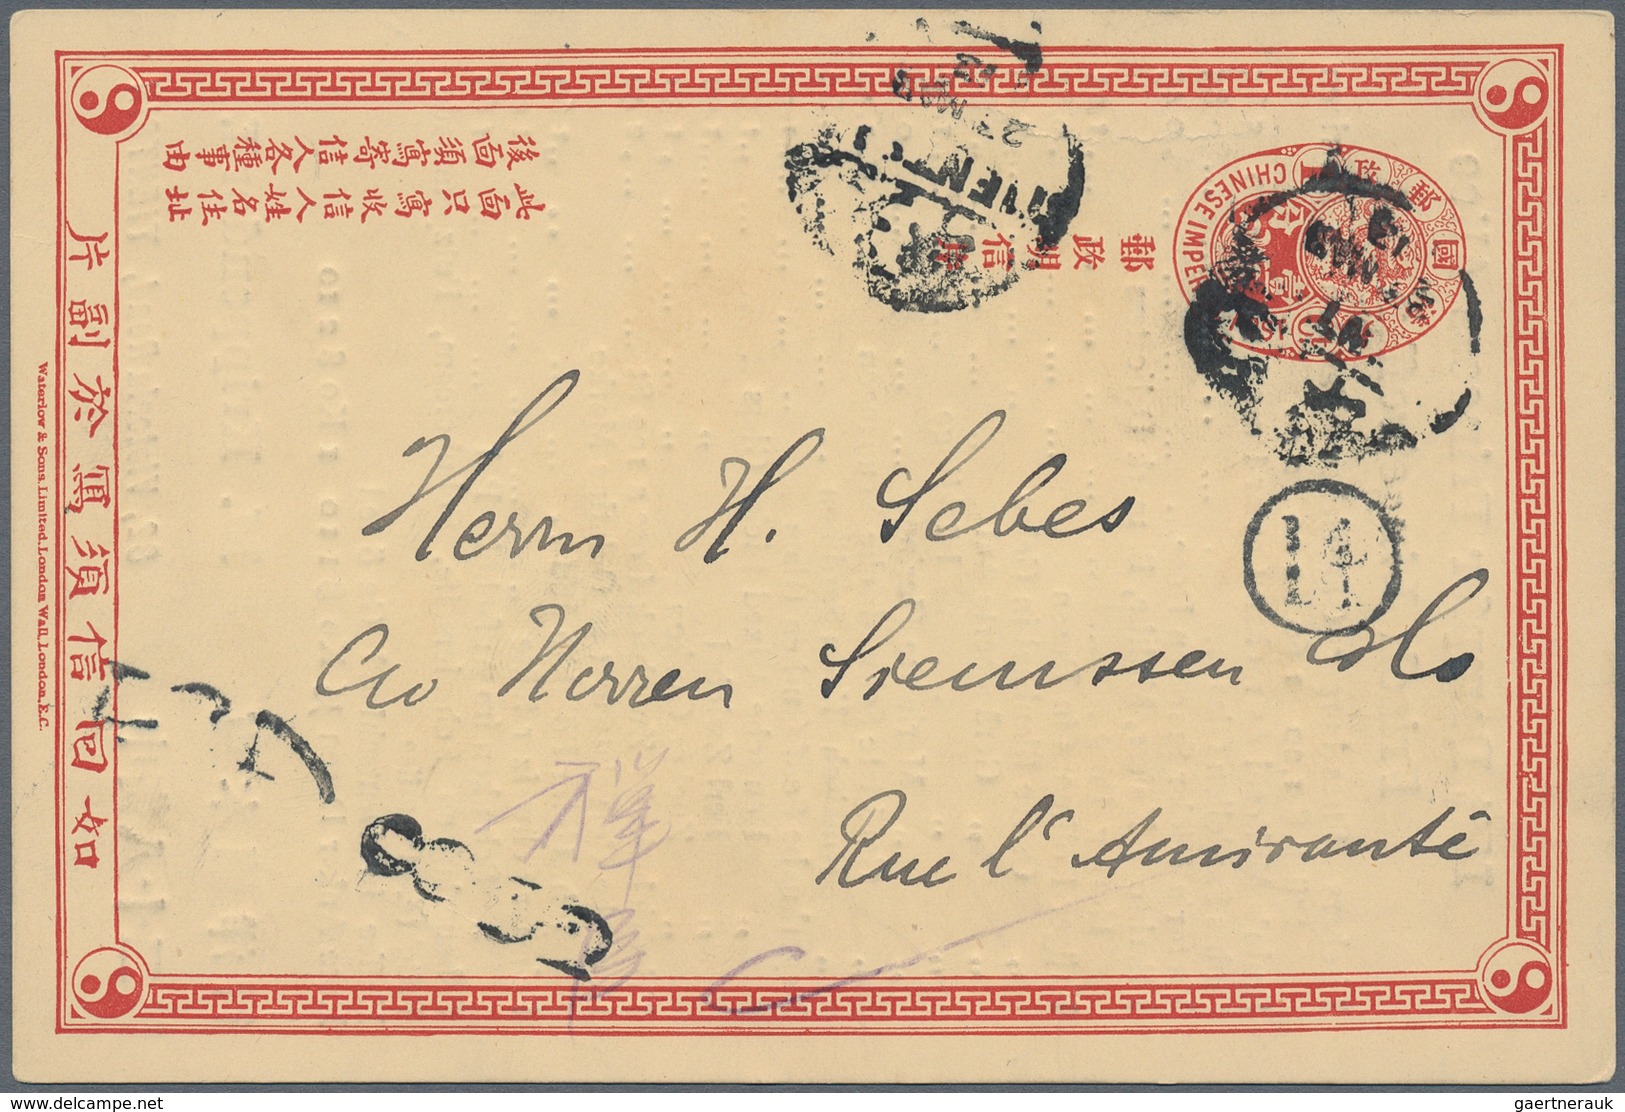 China - Ganzsachen: 1898, Card CIP 1 C., Question Part Of Double Card, Canc. "TIENTSIN 24 MAY 13" Us - Cartes Postales